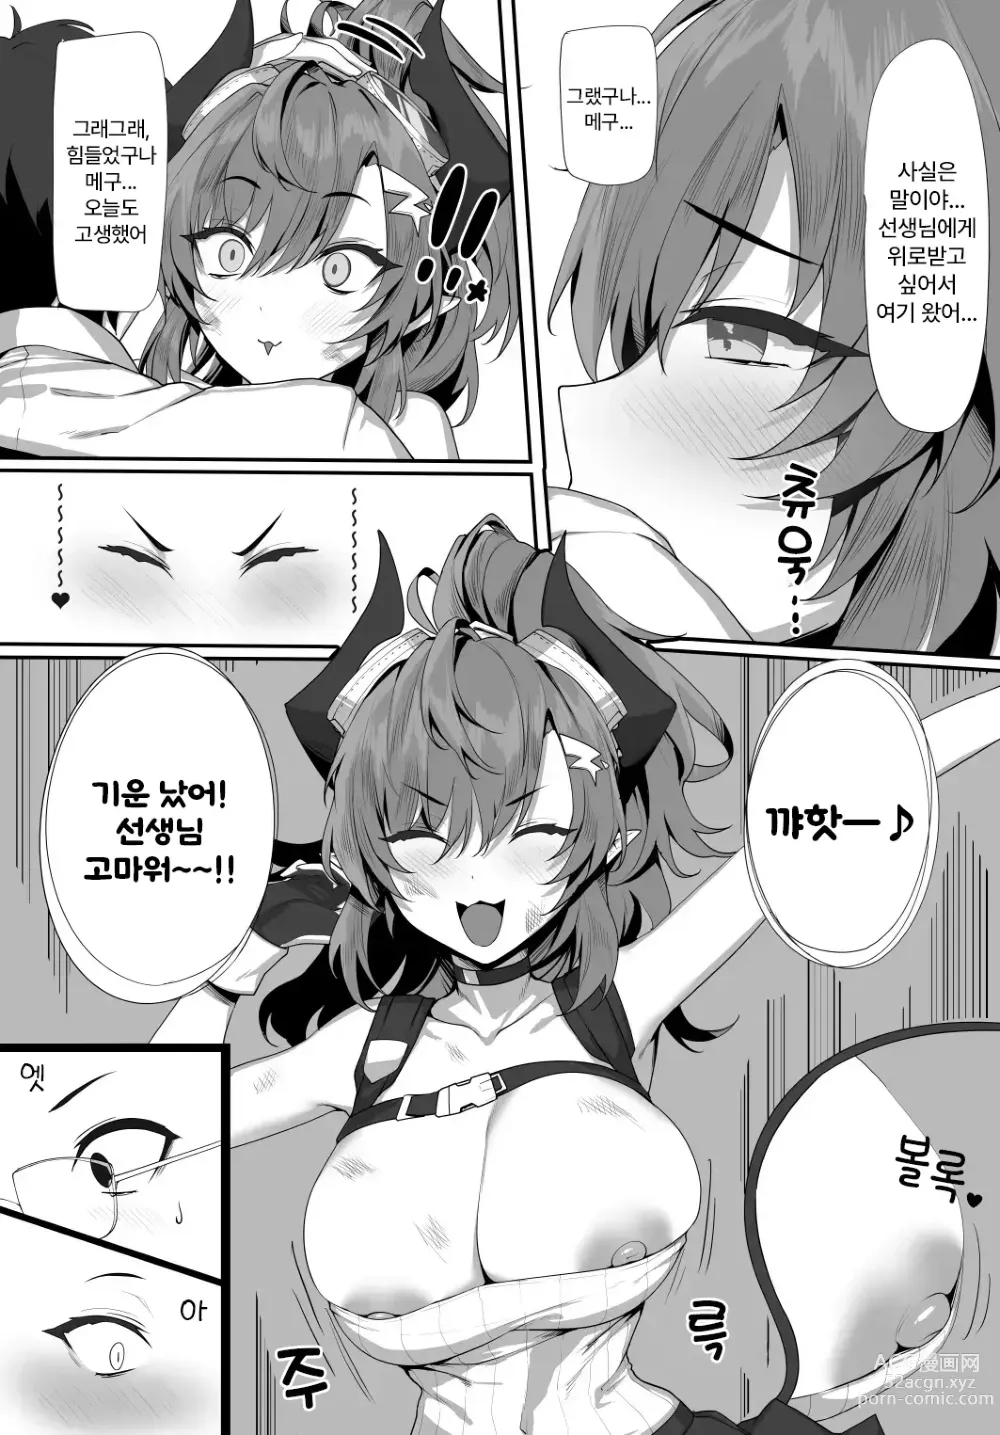 Page 6 of doujinshi 알려줘